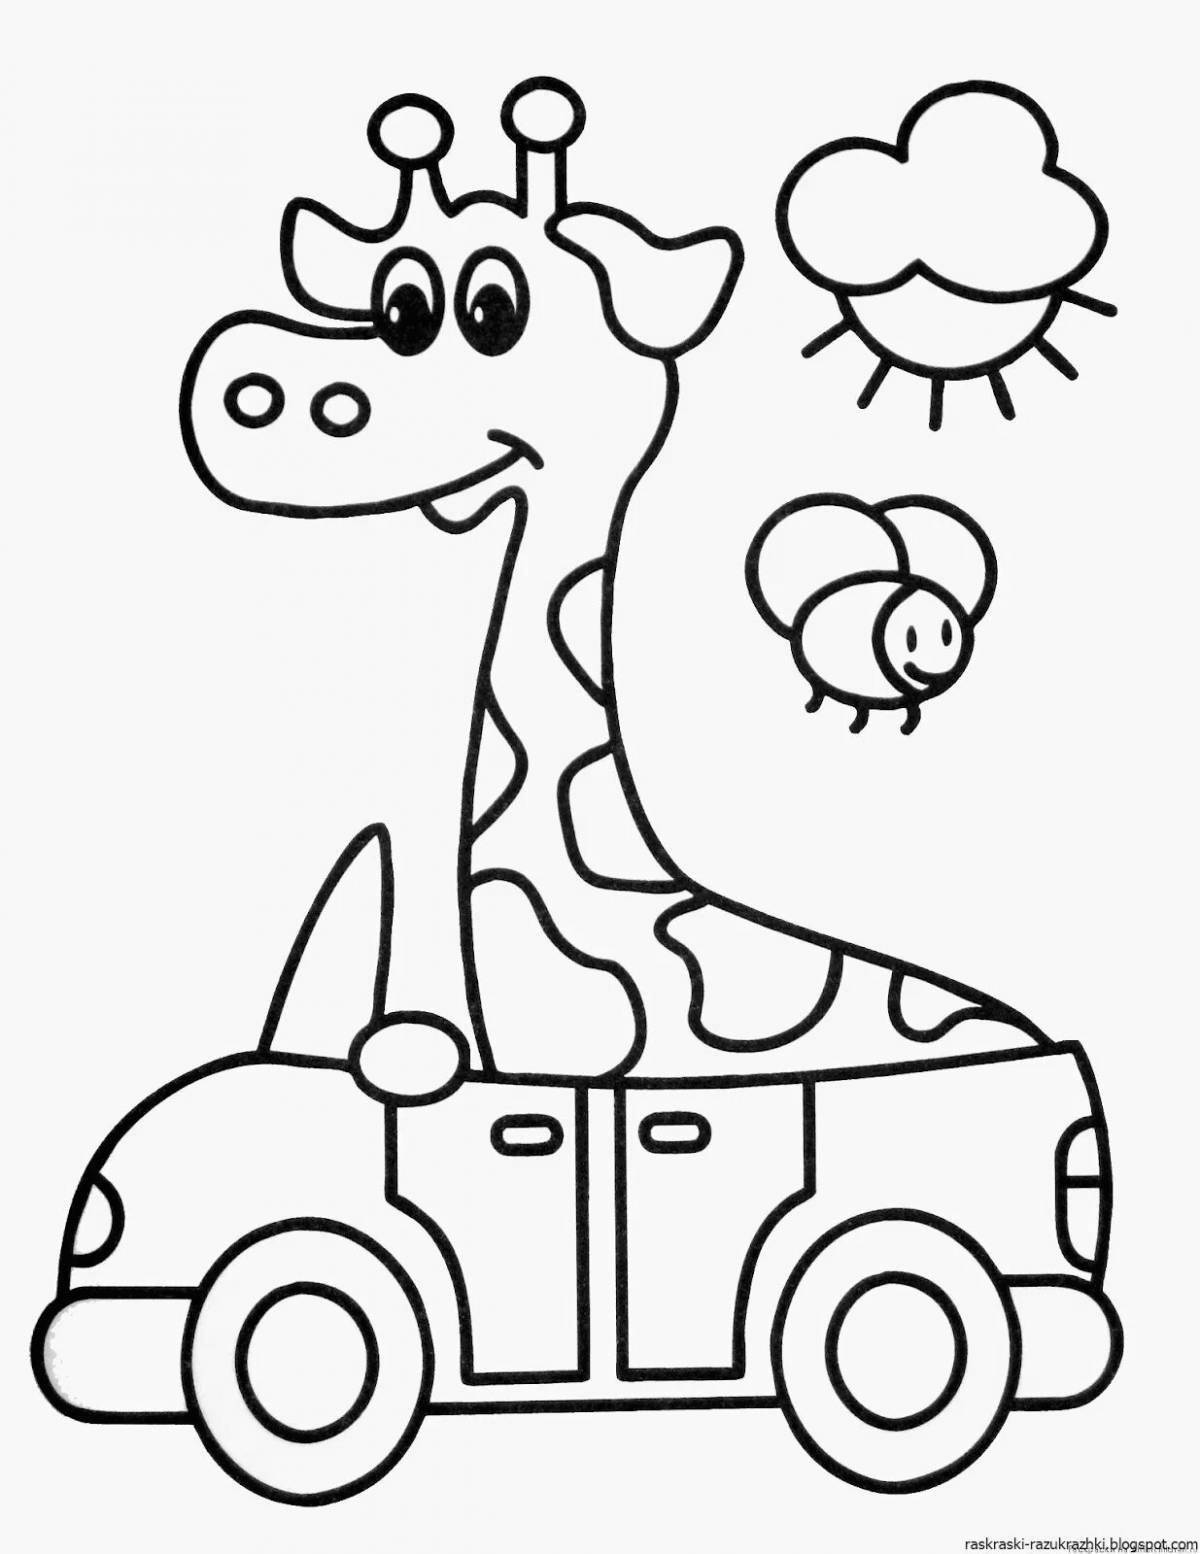 Coloring pages adorable cars for boys 2 years old